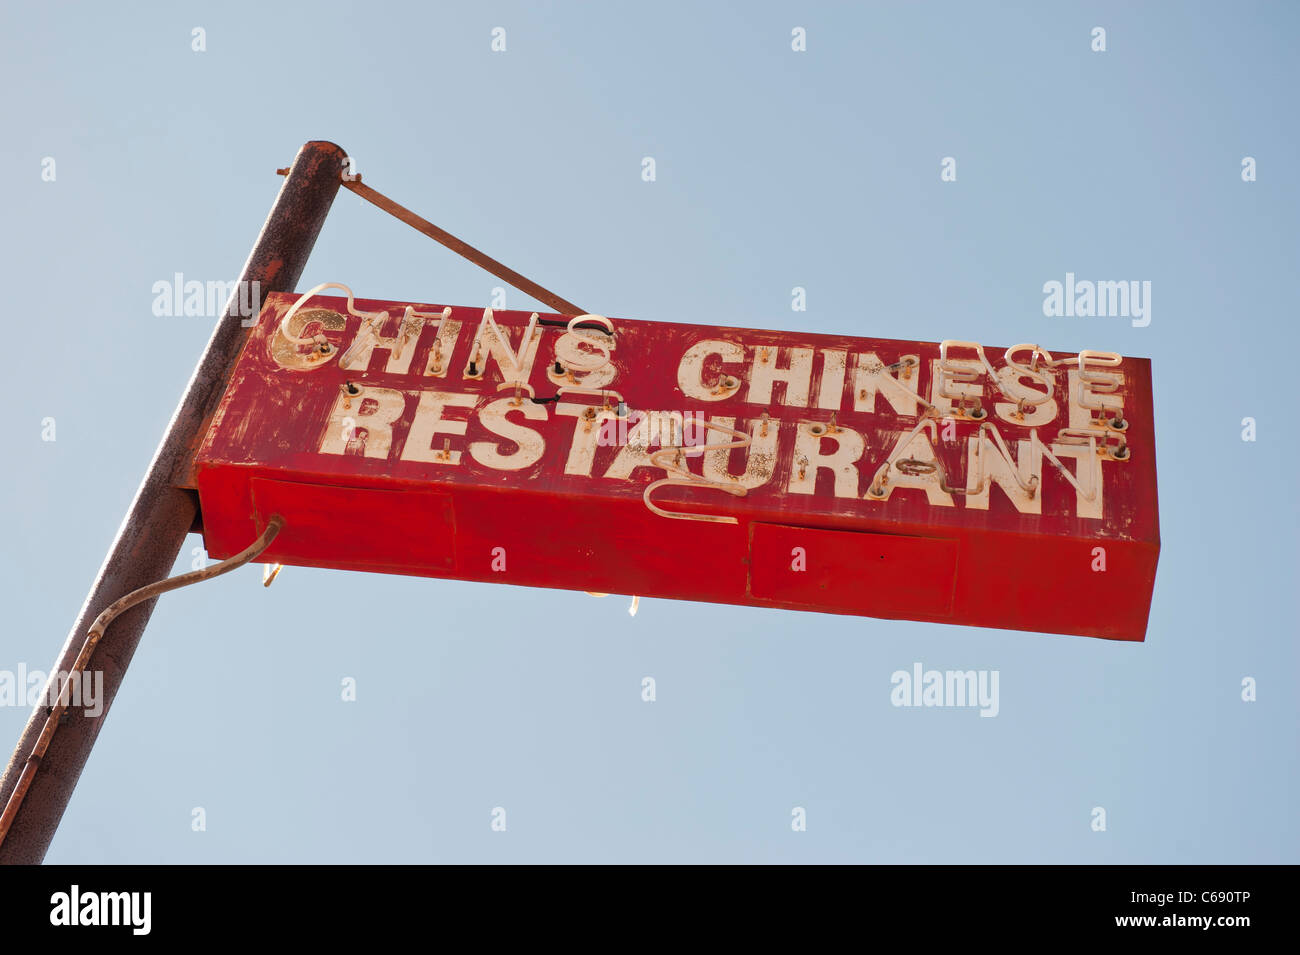 Chins Chinese Restaurant Sign in Broome, Australia Stock Photo